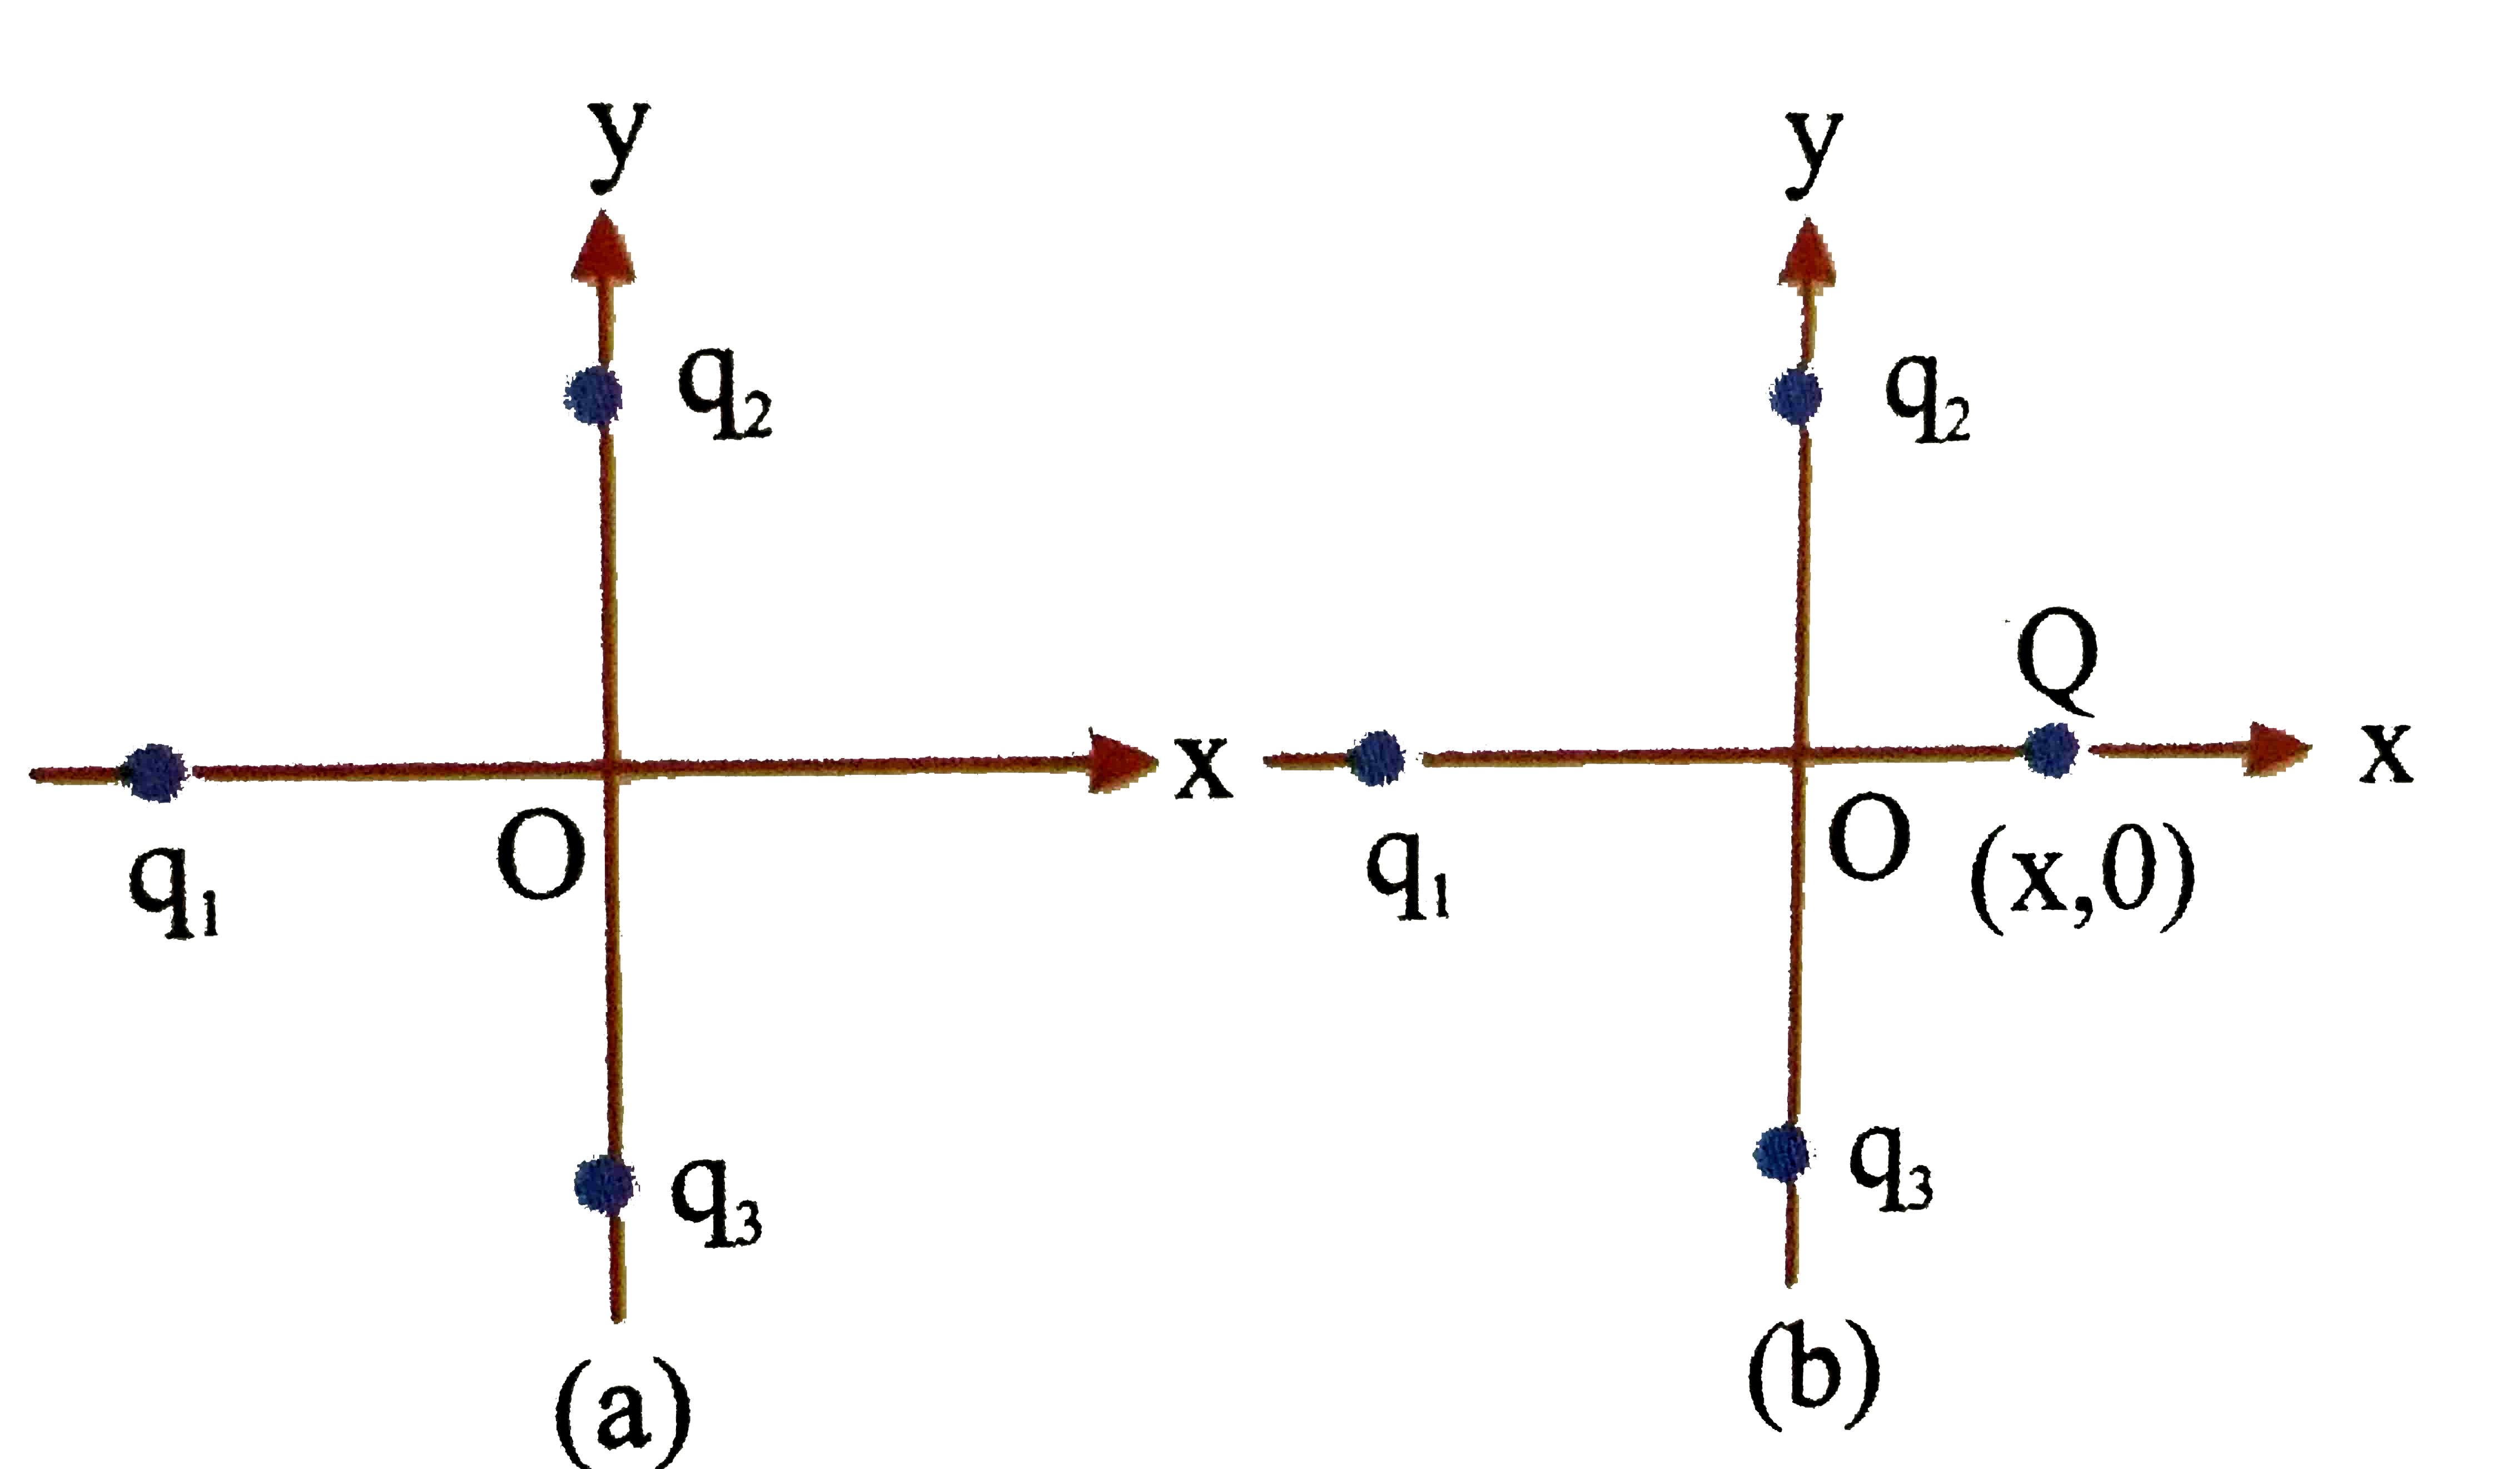 In figure two positive charges q(2) and q(1) fixed along the y-axis ,exert a net electric force in the +x direction on a charge q(1) fixed along the x-axis if a positive charge Q is  added at (x,0) the force on q(1)